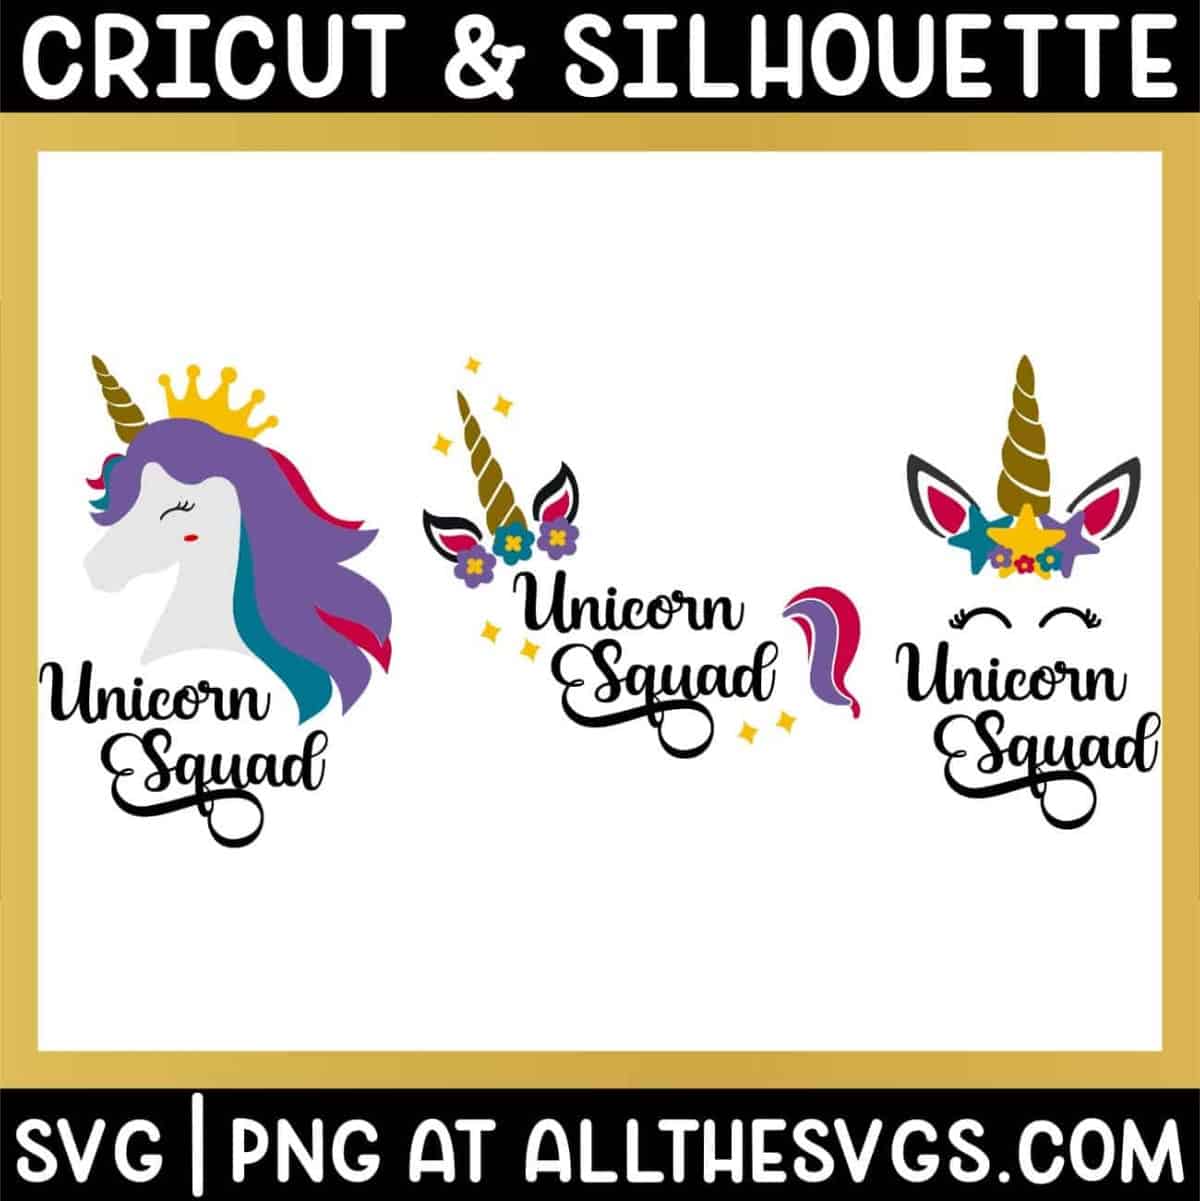 free unicorn squad svg png file with crown, flowers, stars, eyelashes.